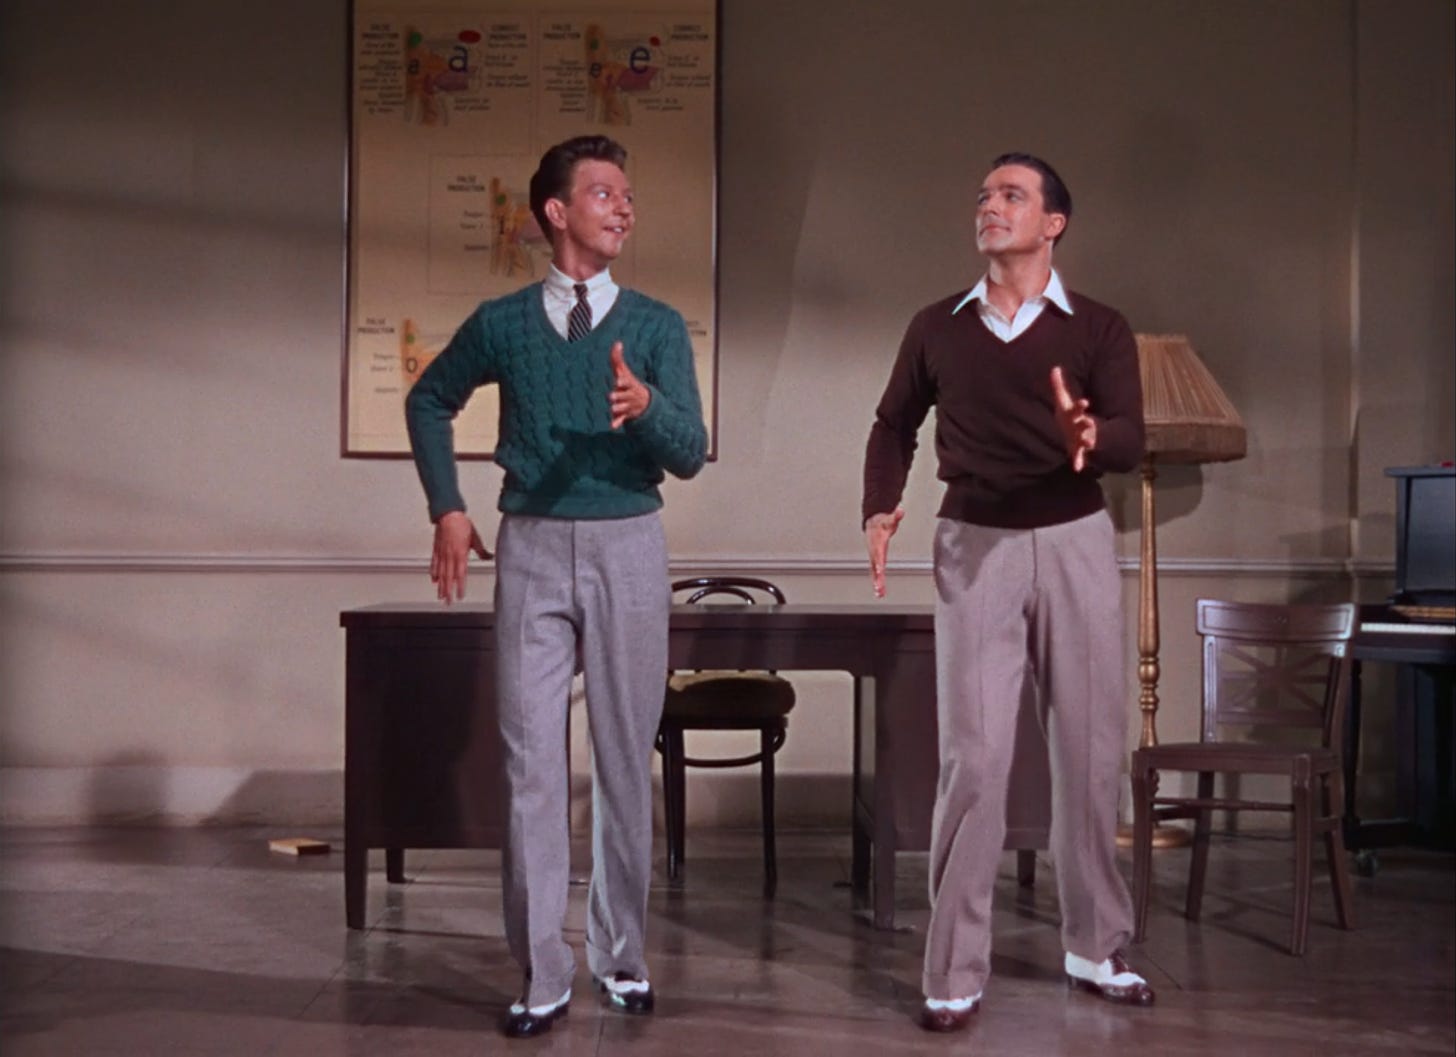 Donald O'Connor as Cosmo Brown (left) and Gene Kelly as Don Lockwood (right) in SINGIN' IN THE RAIN.